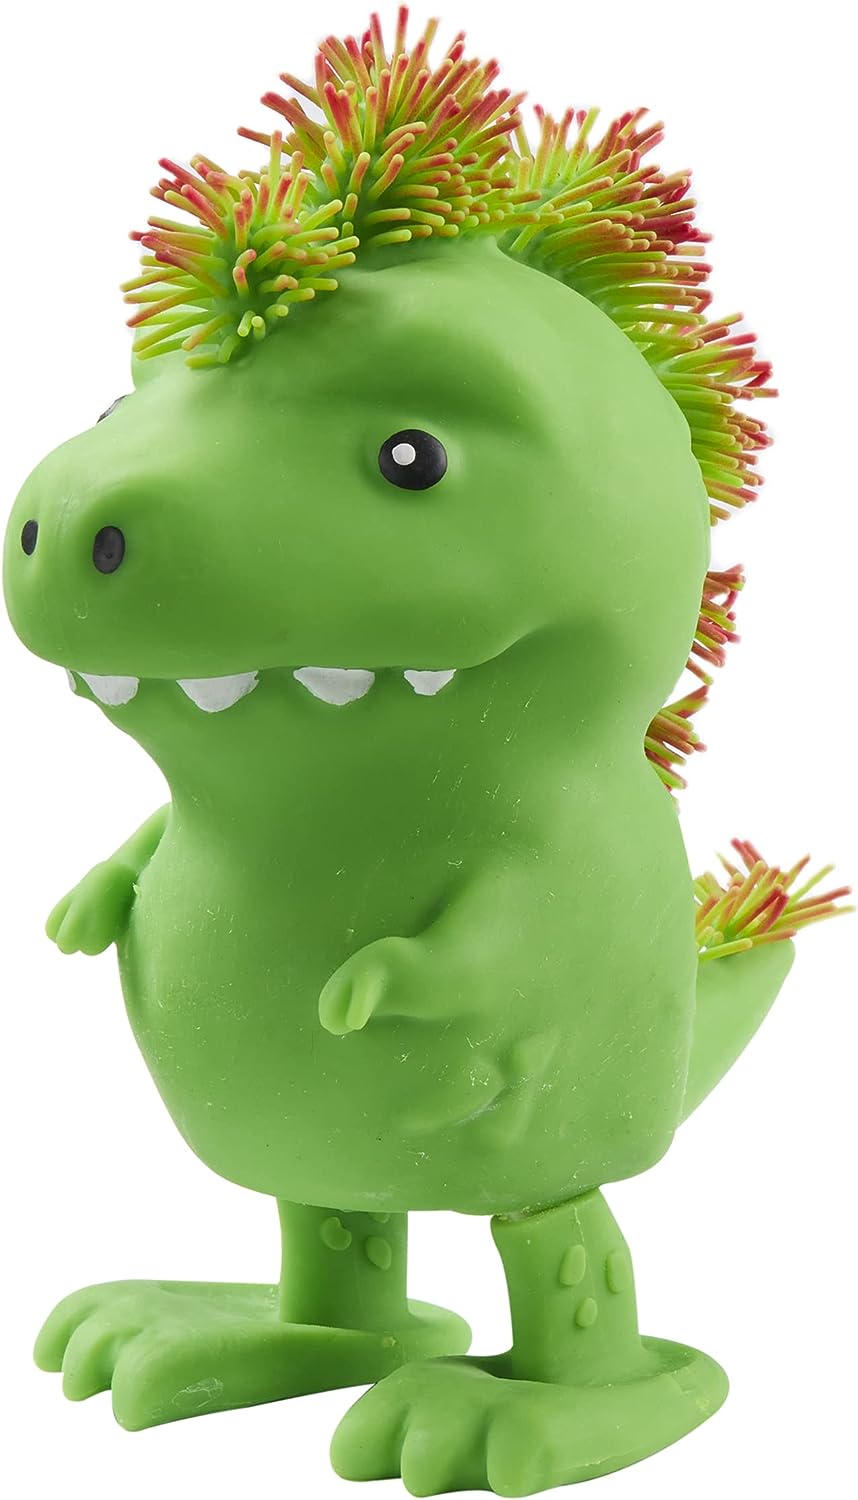 eolo sport hk JP010 Jiggly Dino, Interactive Motion and Sounds Electronic Pets